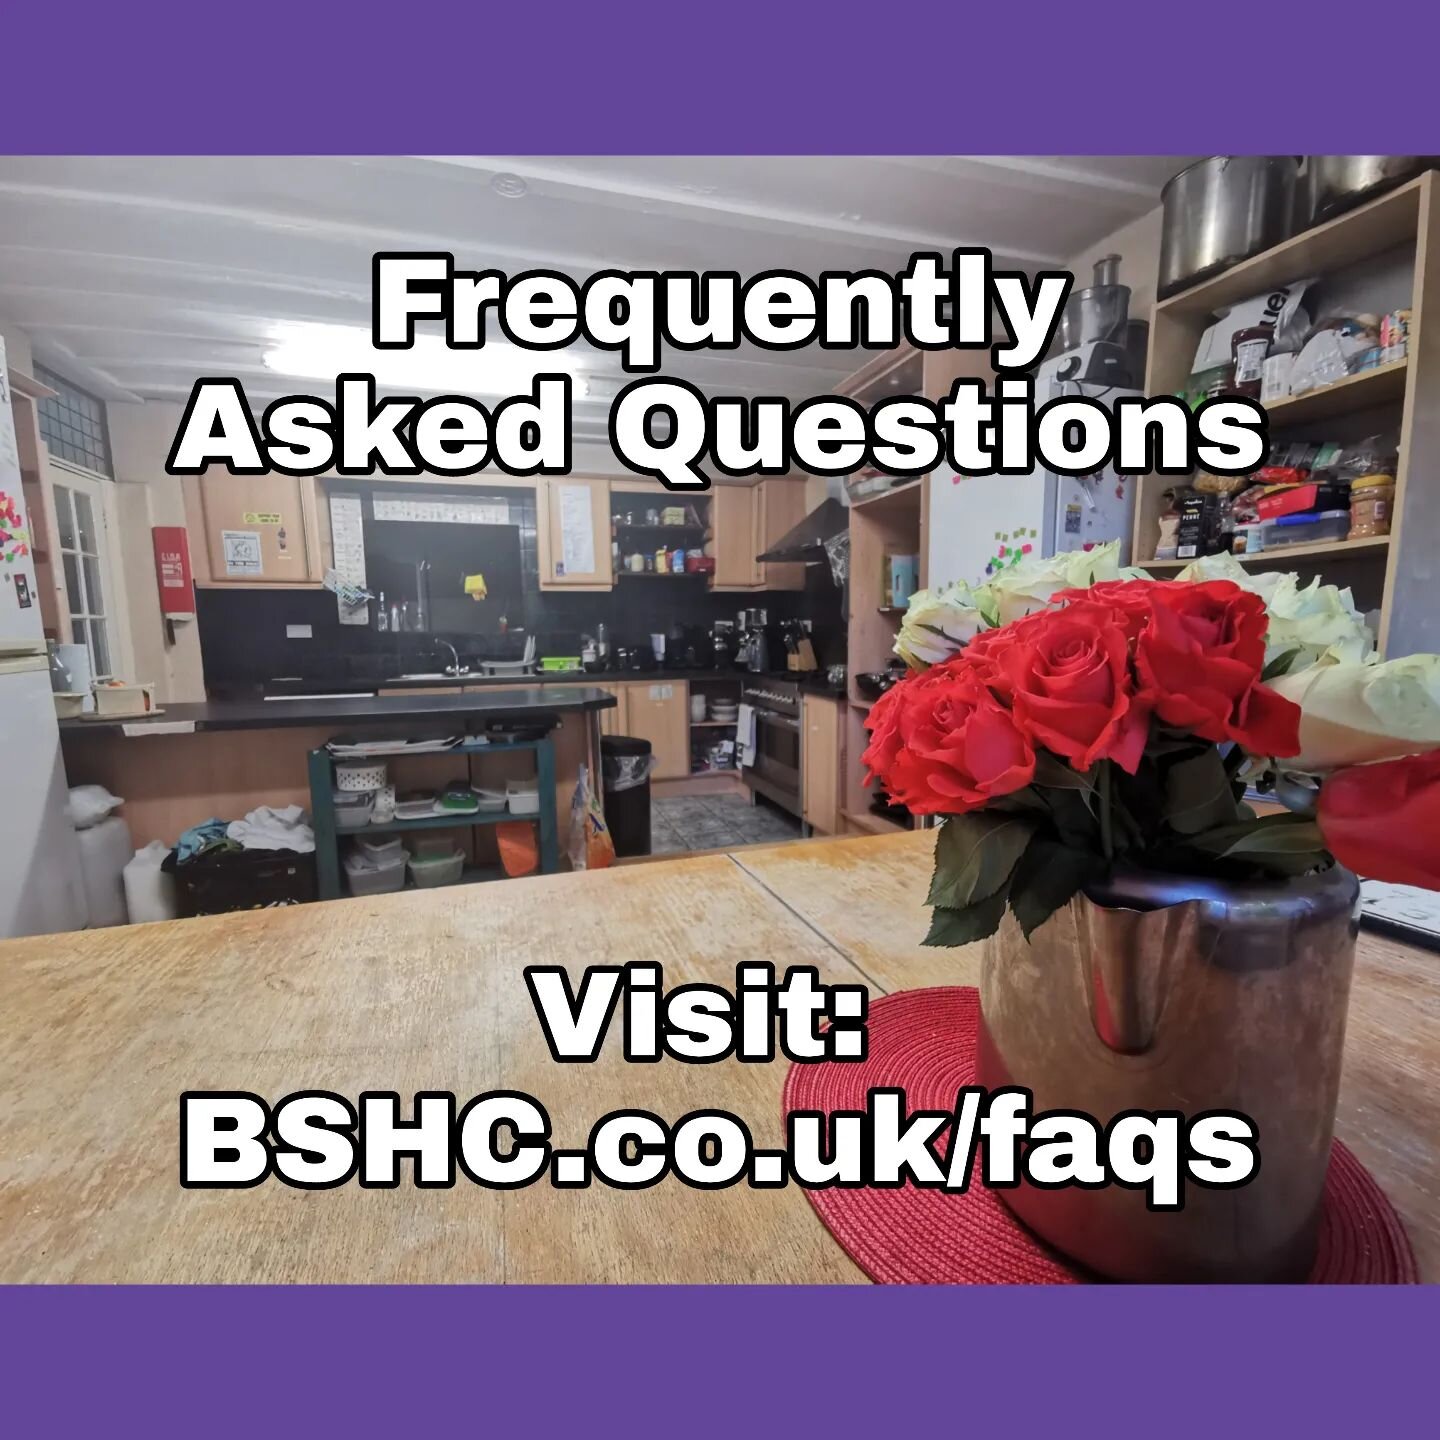 Over the past few days we&rsquo;ve been asked a number of questions about how the house works, so we decided to update our website with a FAQs page! You can check it out at the link in our bio!
If you still have more questions, feel free to ask in th